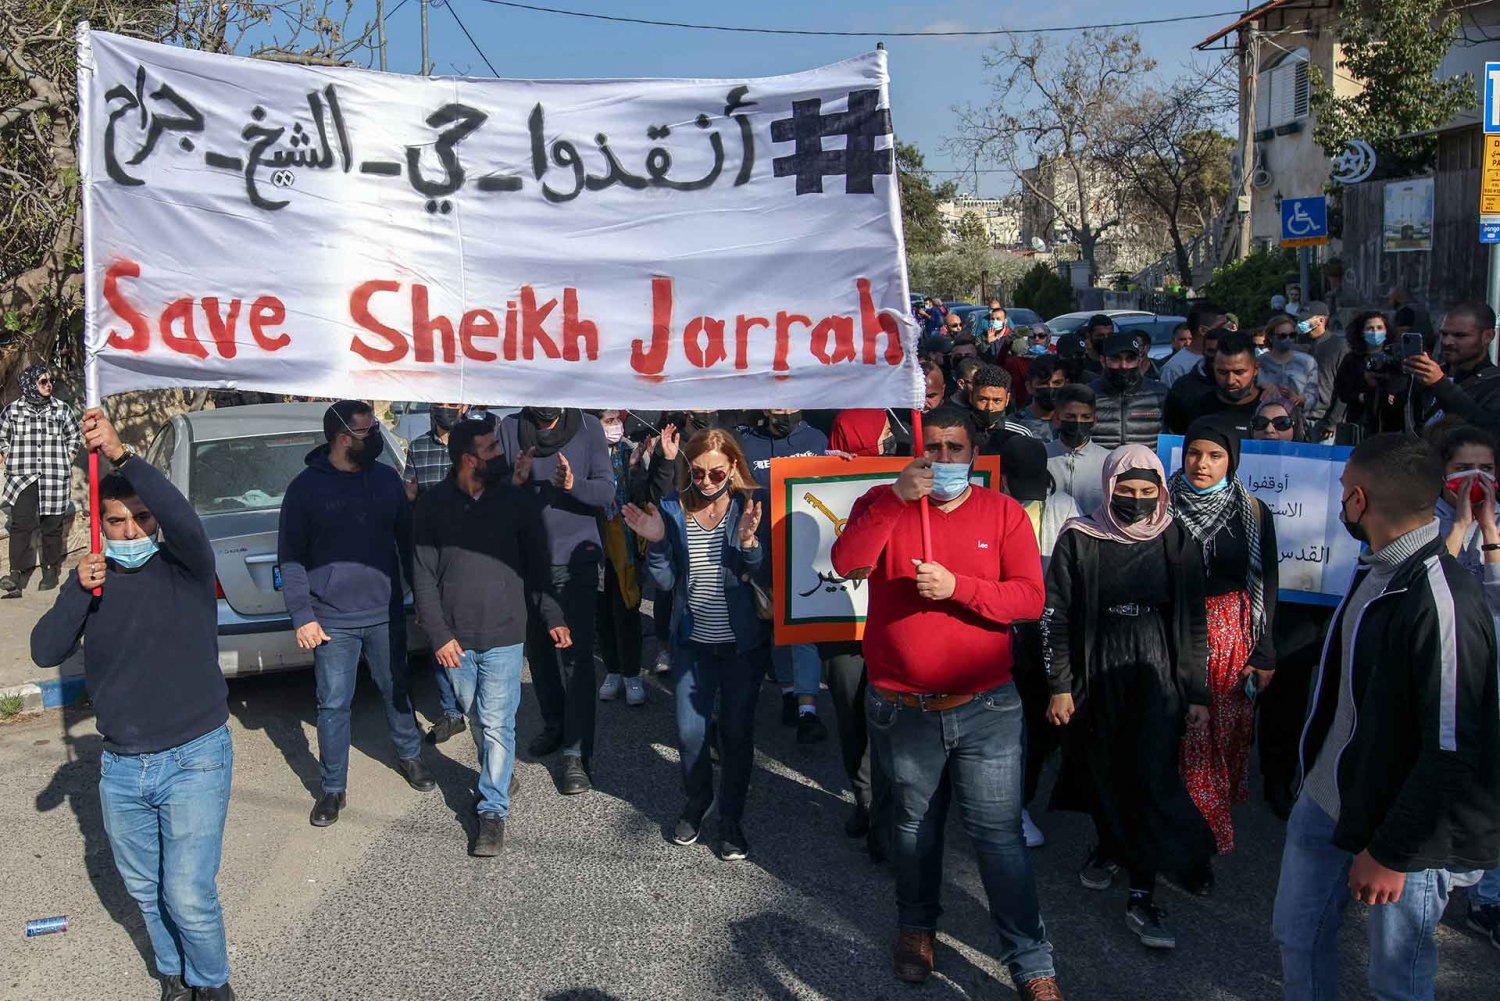 Palestinian, Israeli, and foreign activists demonstrate in Sheikh Jarrah, March 19, 2021.